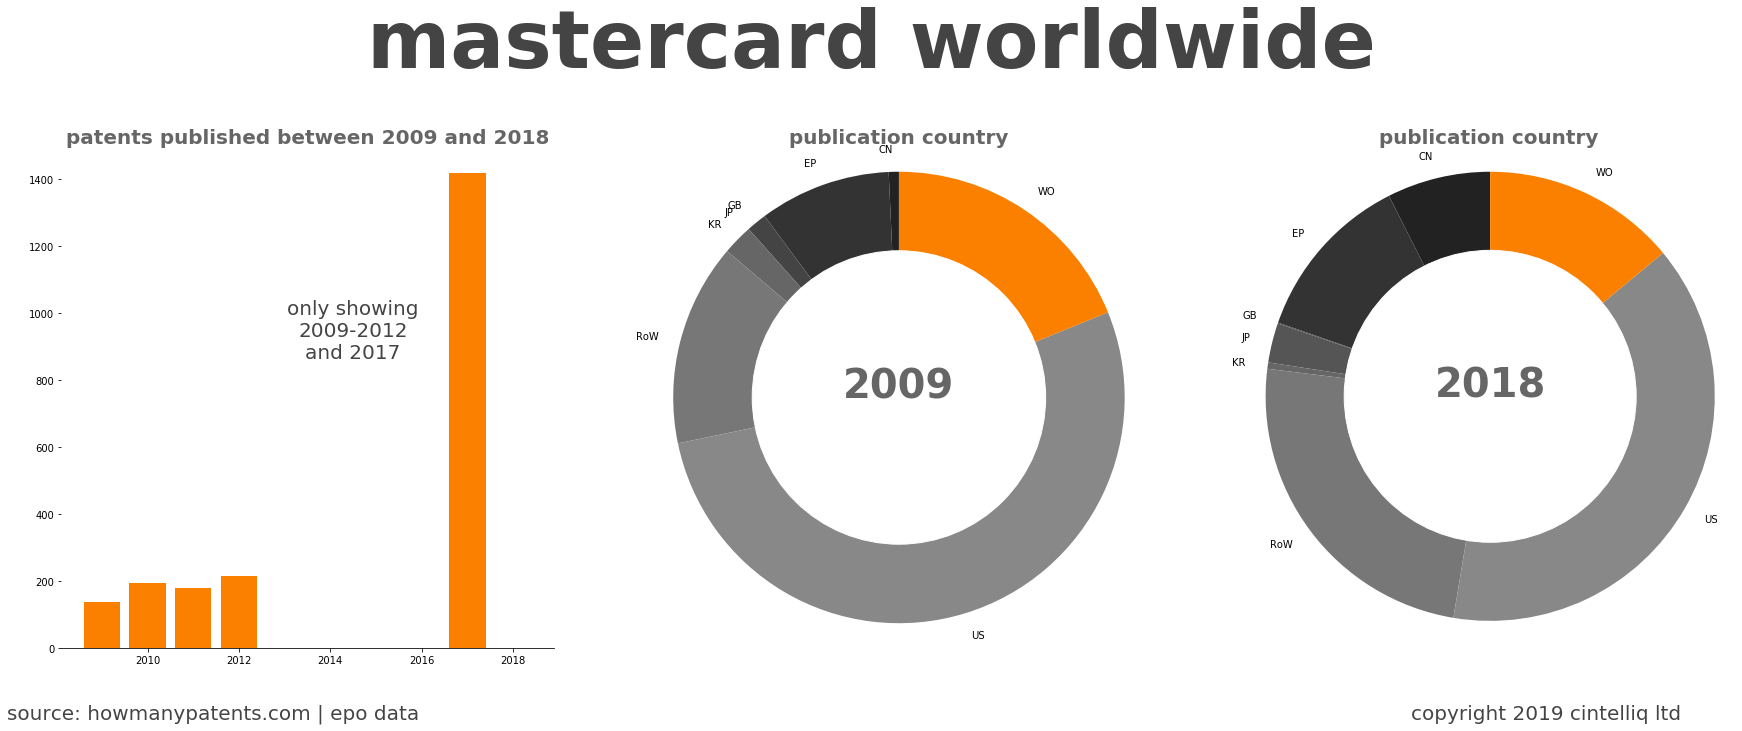 summary of patents for Mastercard Worldwide